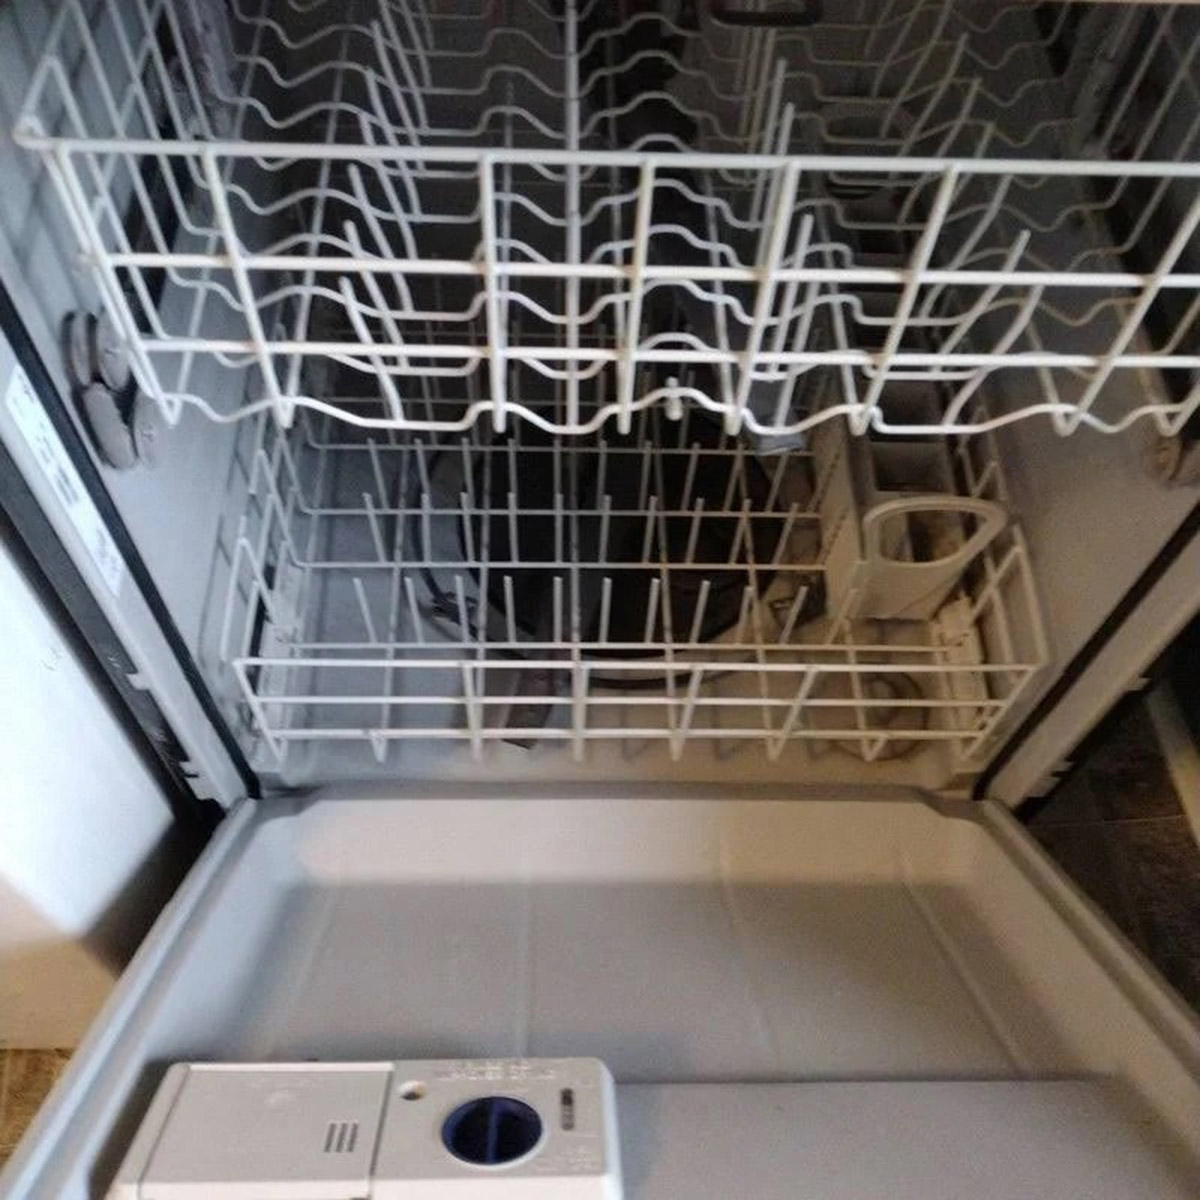 How To Fix The Error Code F9 For Whirlpool Dishwasher